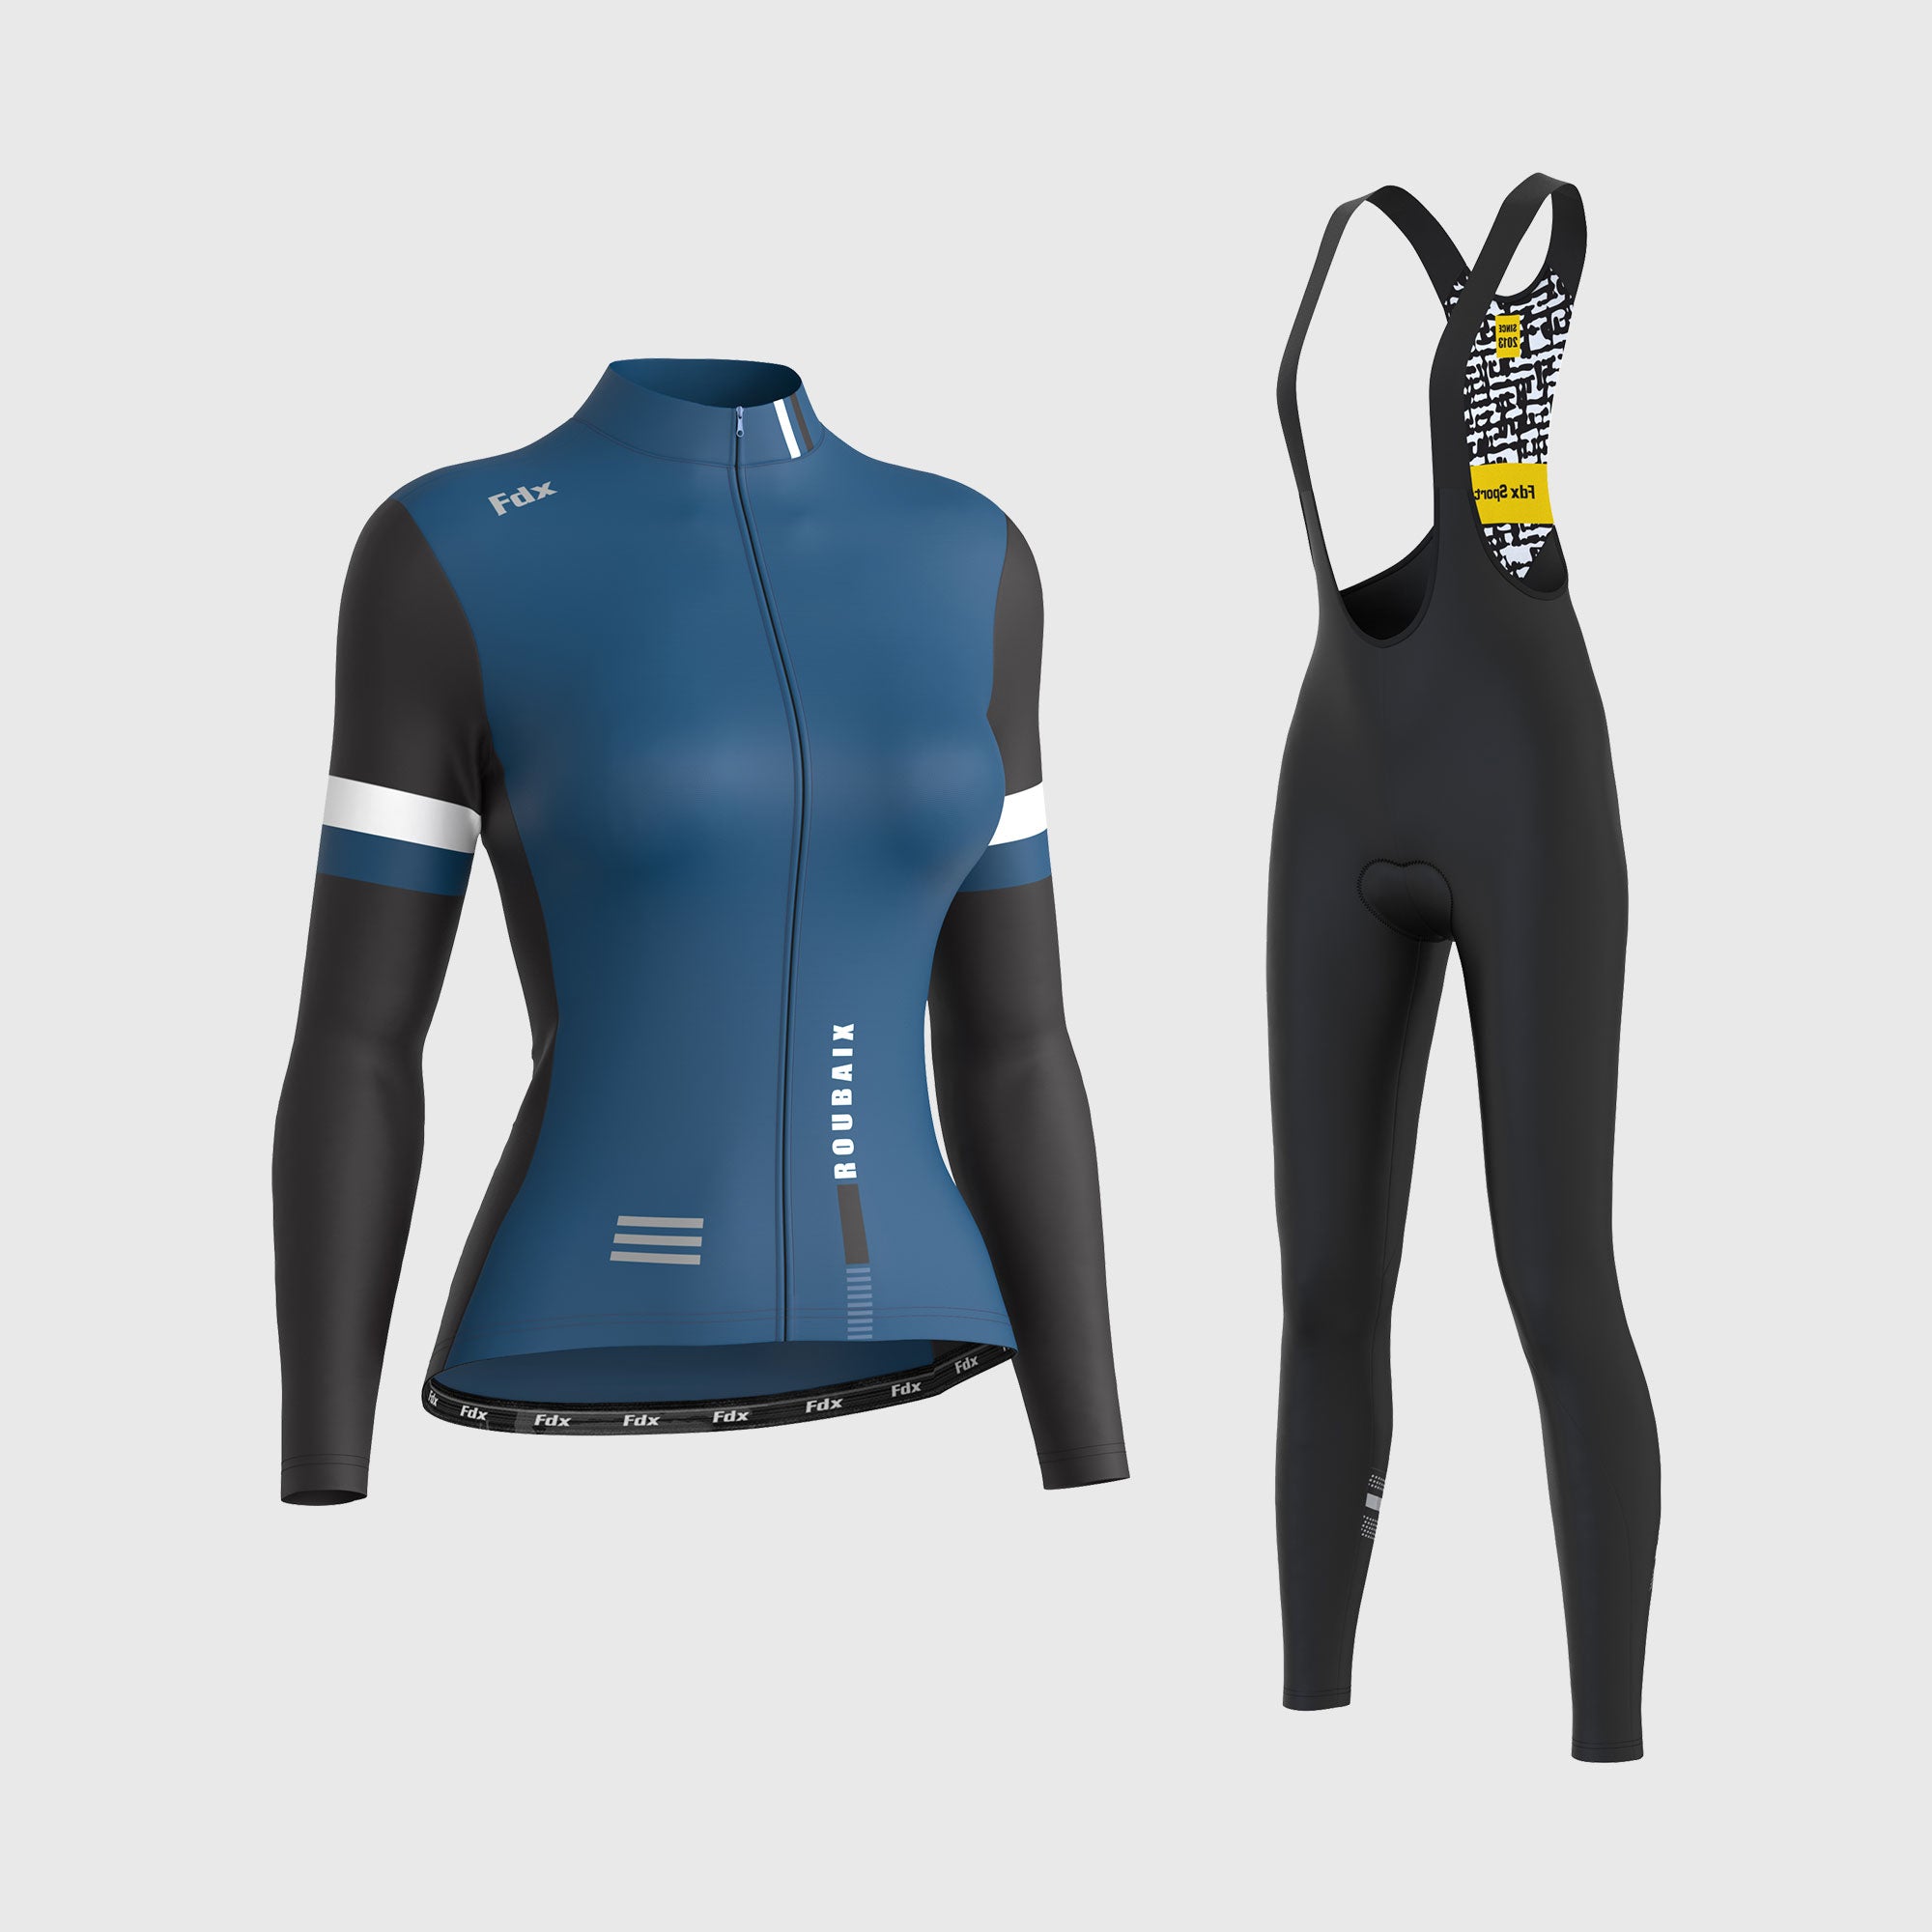 Fdx Women's Set Limited Edition Thermal Roubaix Long Sleeve Cycling Jersey & Bib Tights - Blue